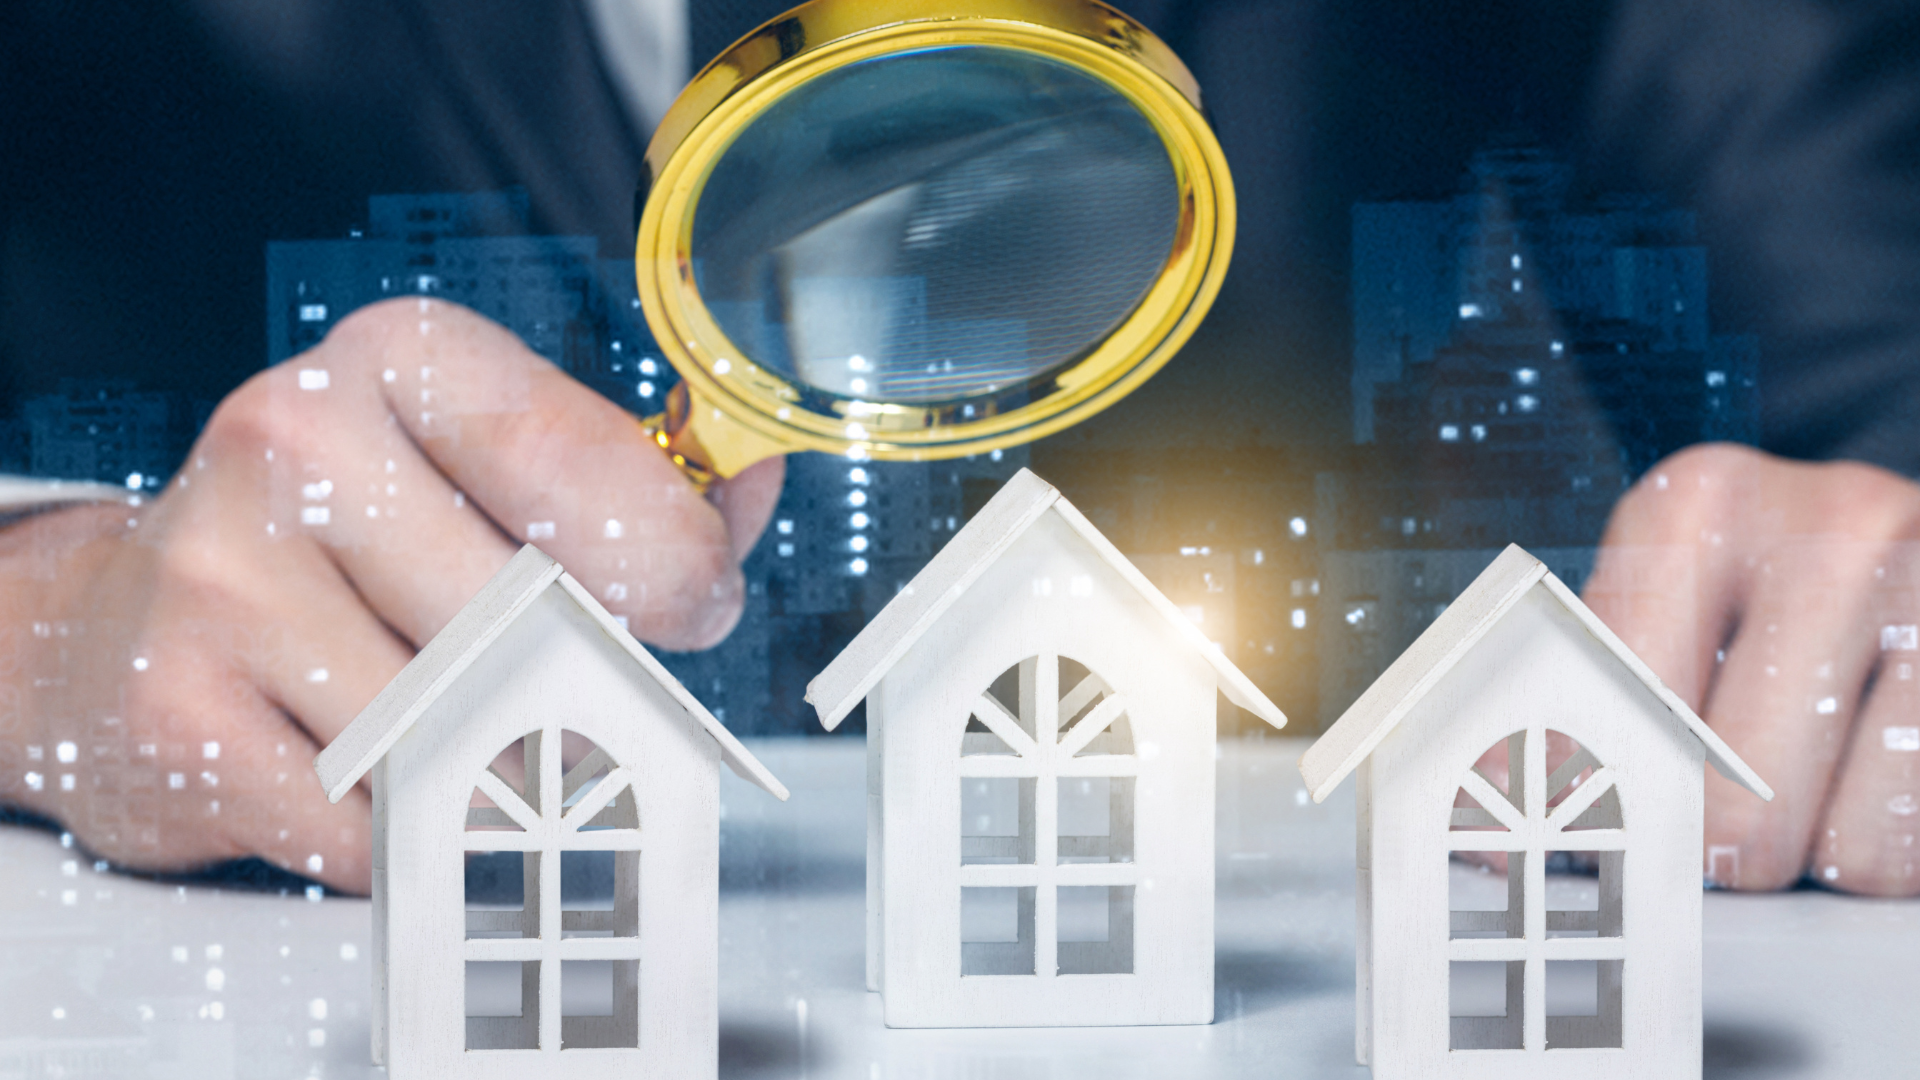 investing in rental properties - using magnifying glass to look into properties